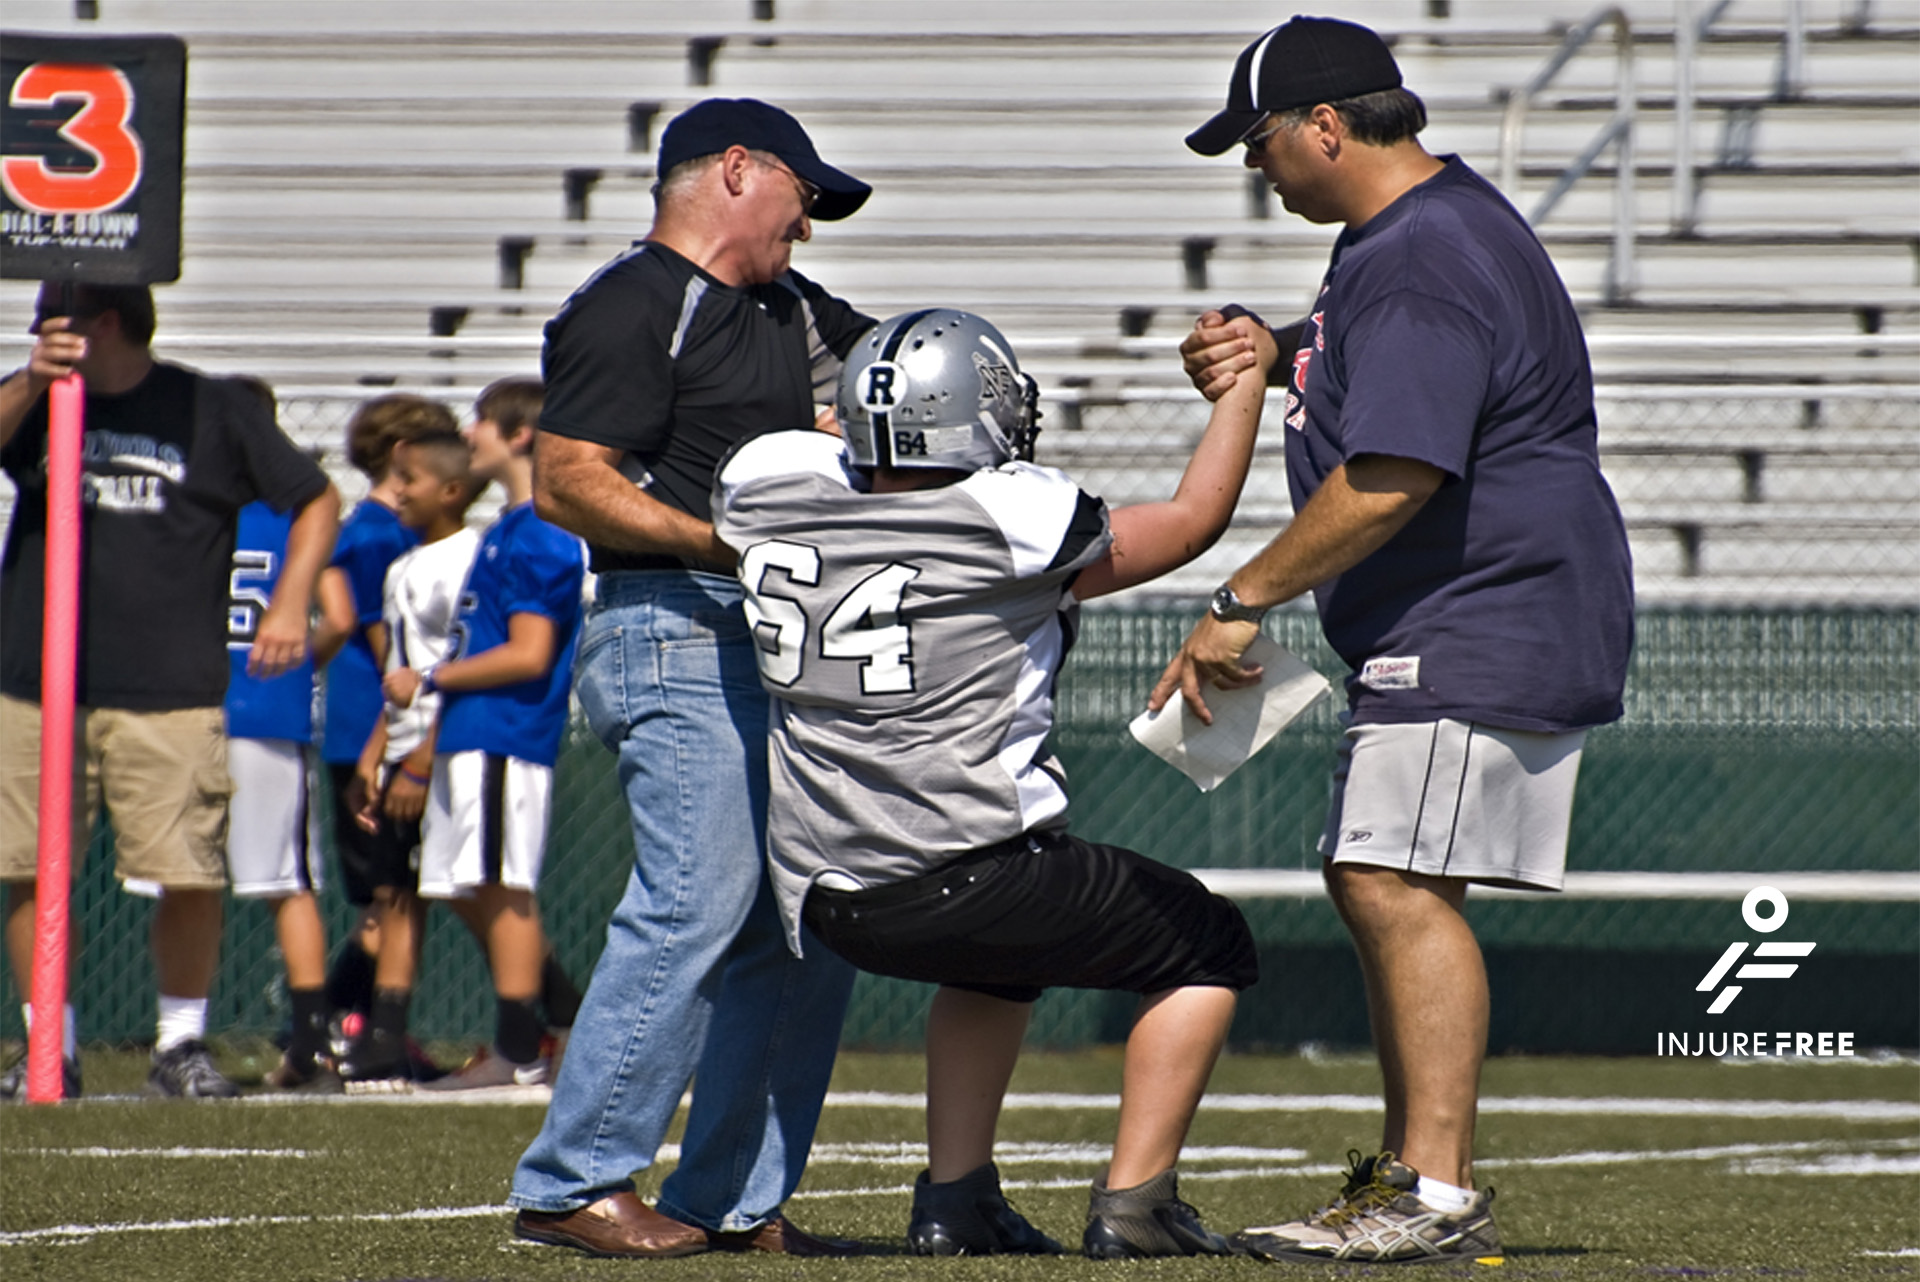 Key Consideration of a Coaches Role as Caregiver:  Supporting Athletes Without On-Site Medical Personnel